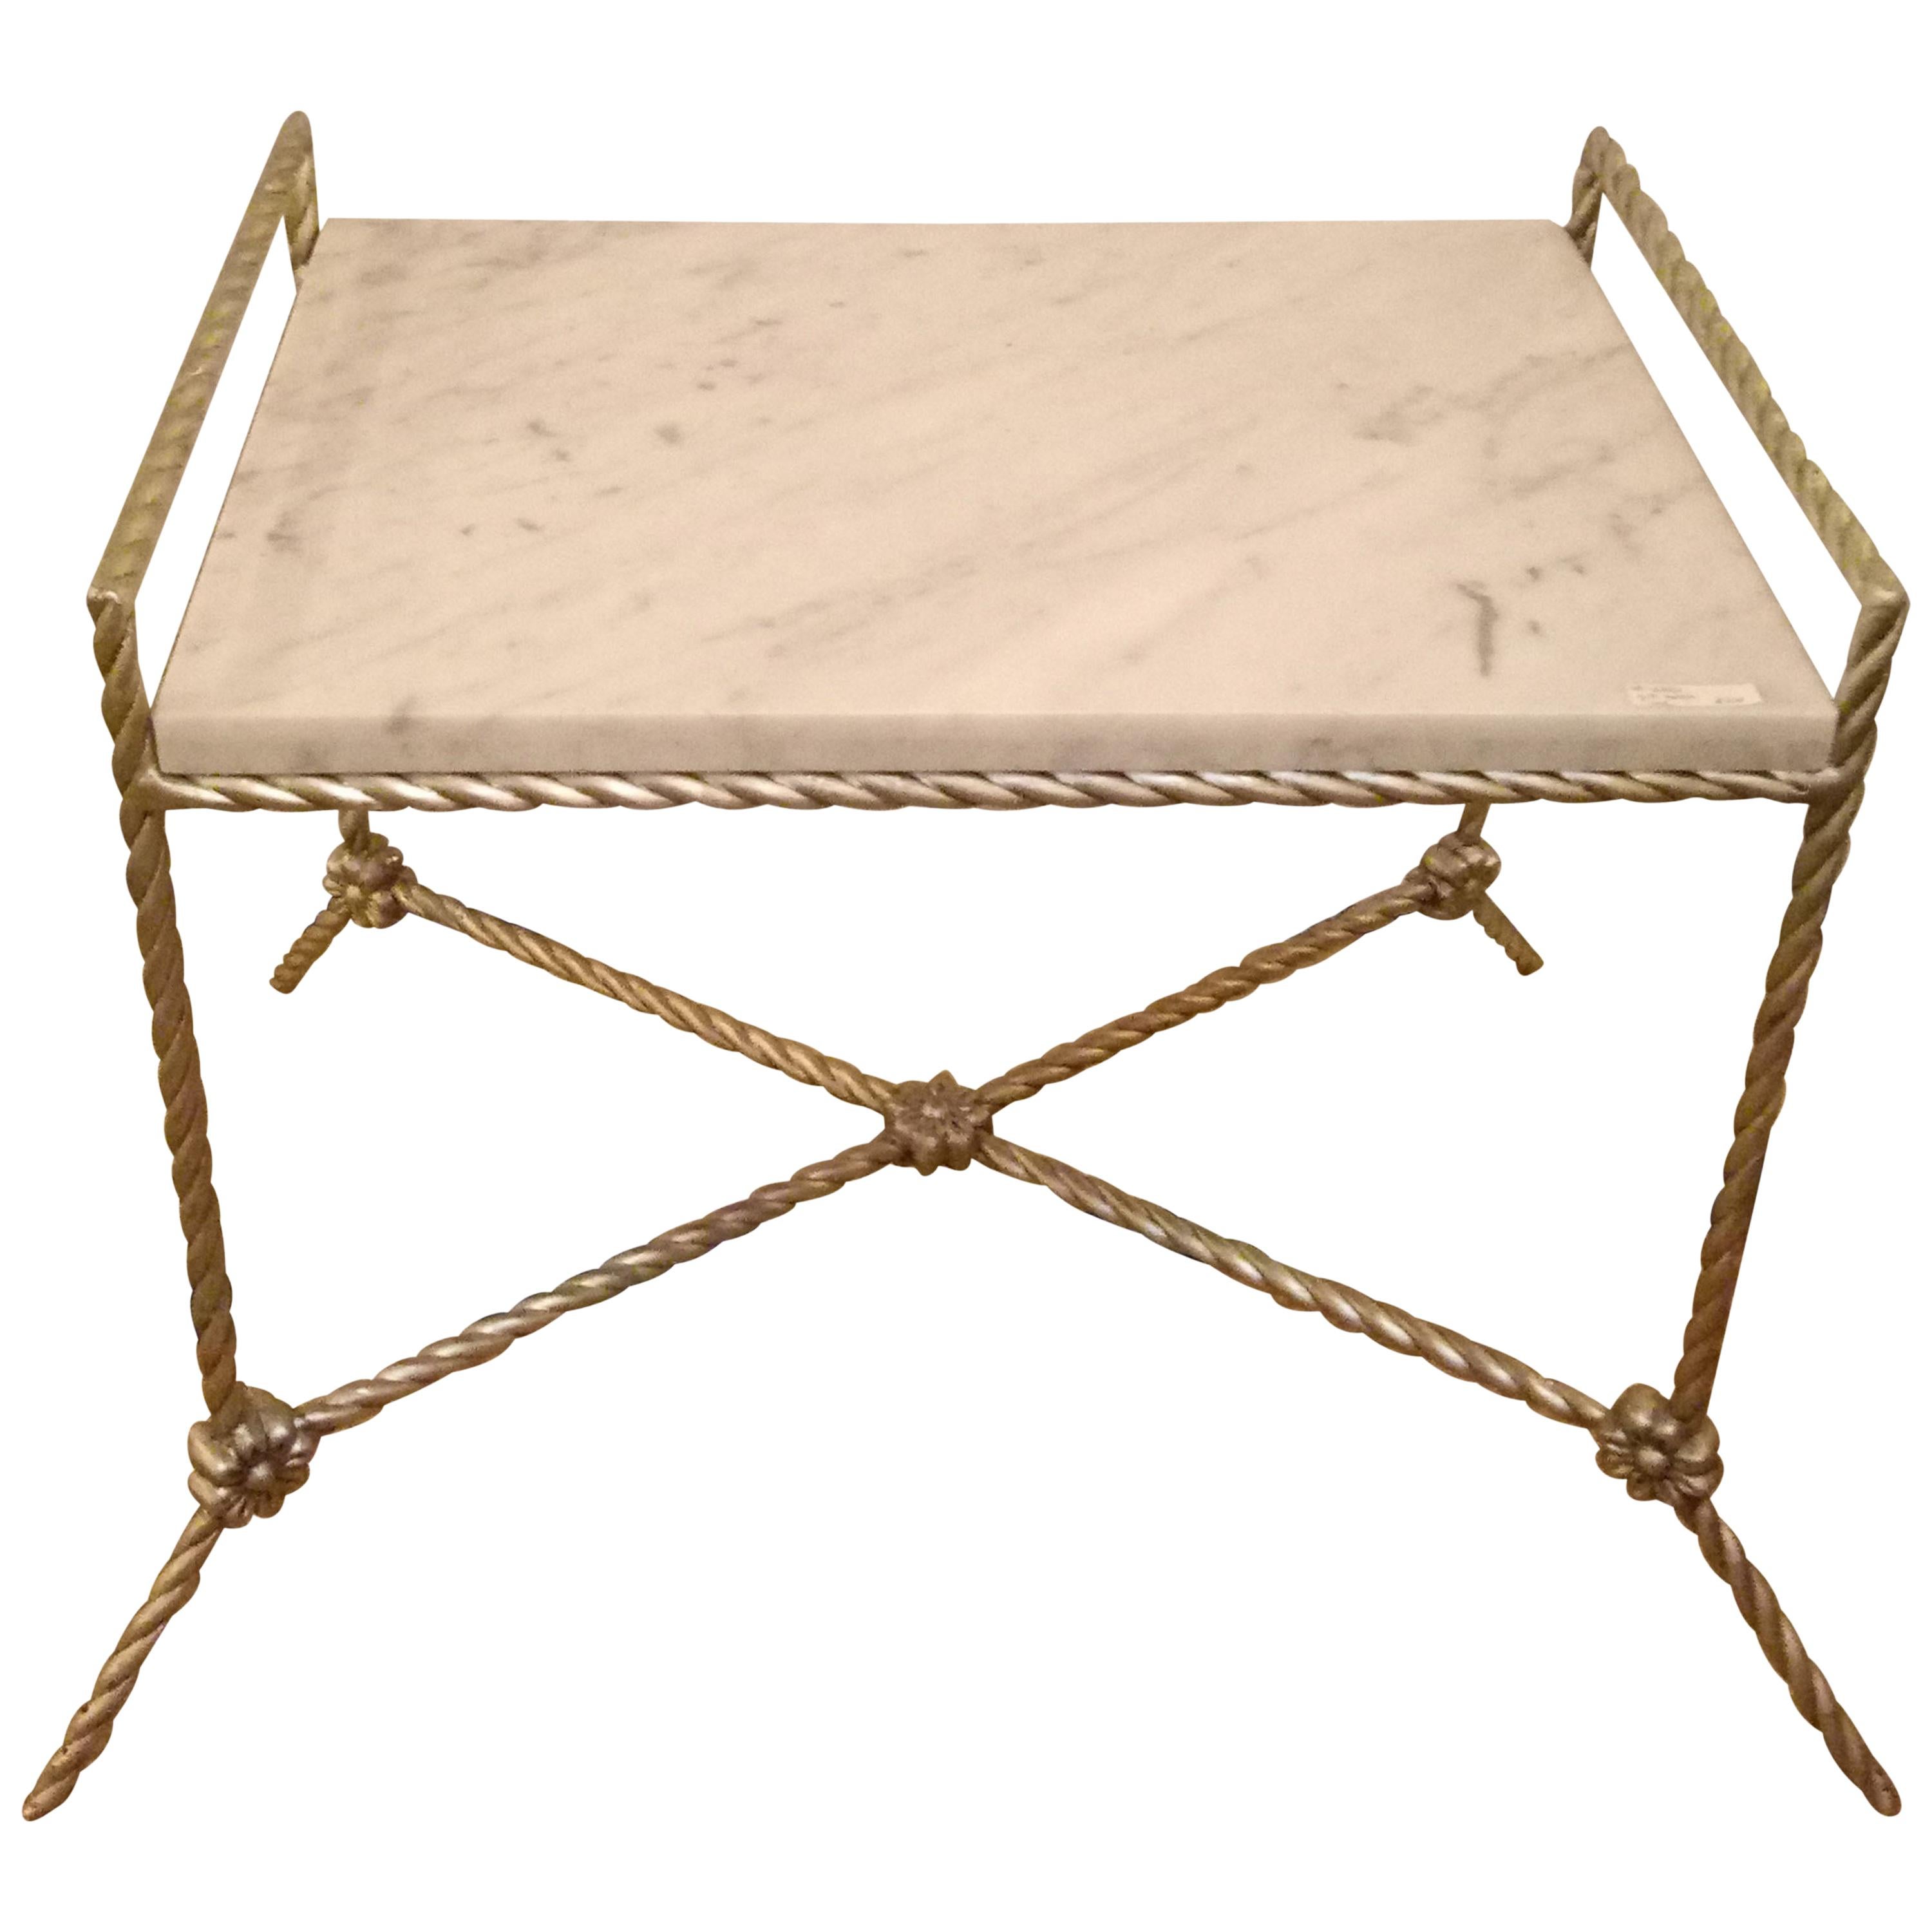 Hollywood Regency Style Silver Gilt Metal Bench or Side Table with a Marble Top